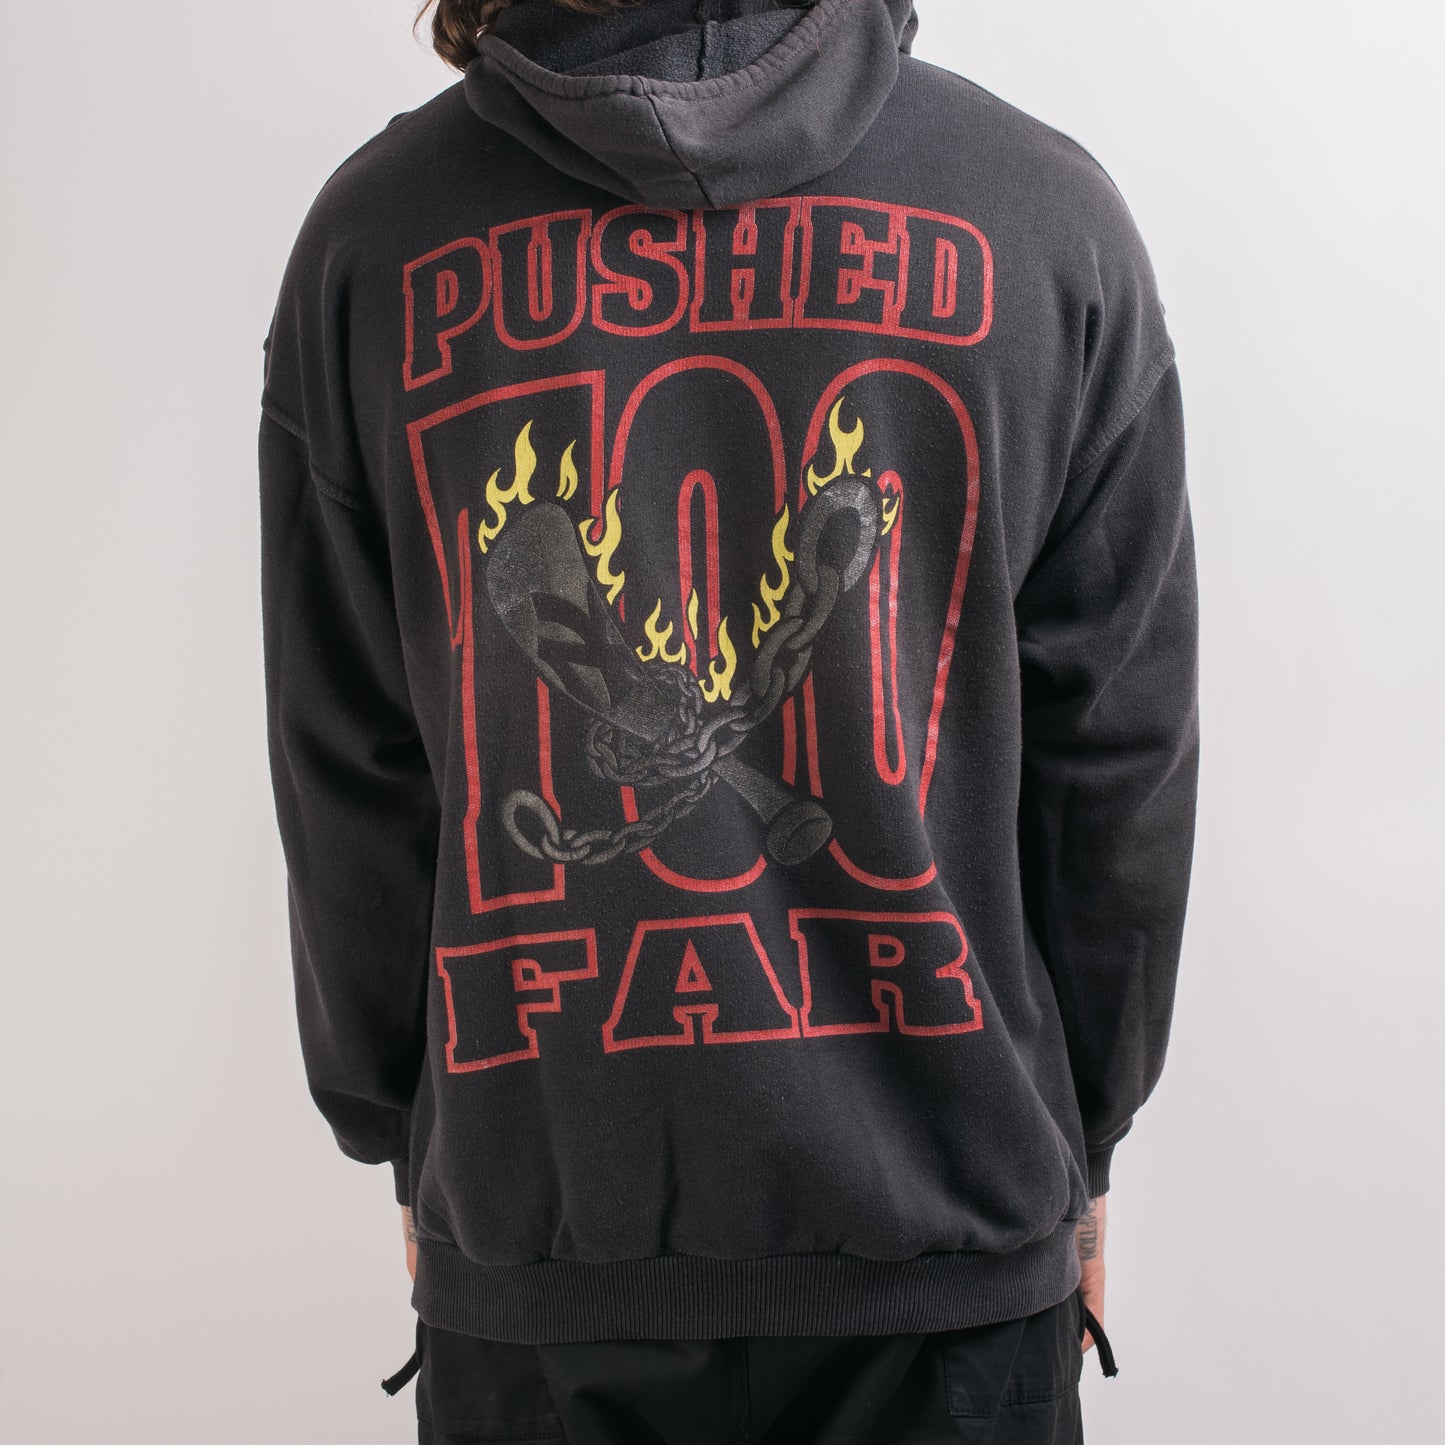 Vintage 90’s Sick Of It All Pushed Too Far Hoodie